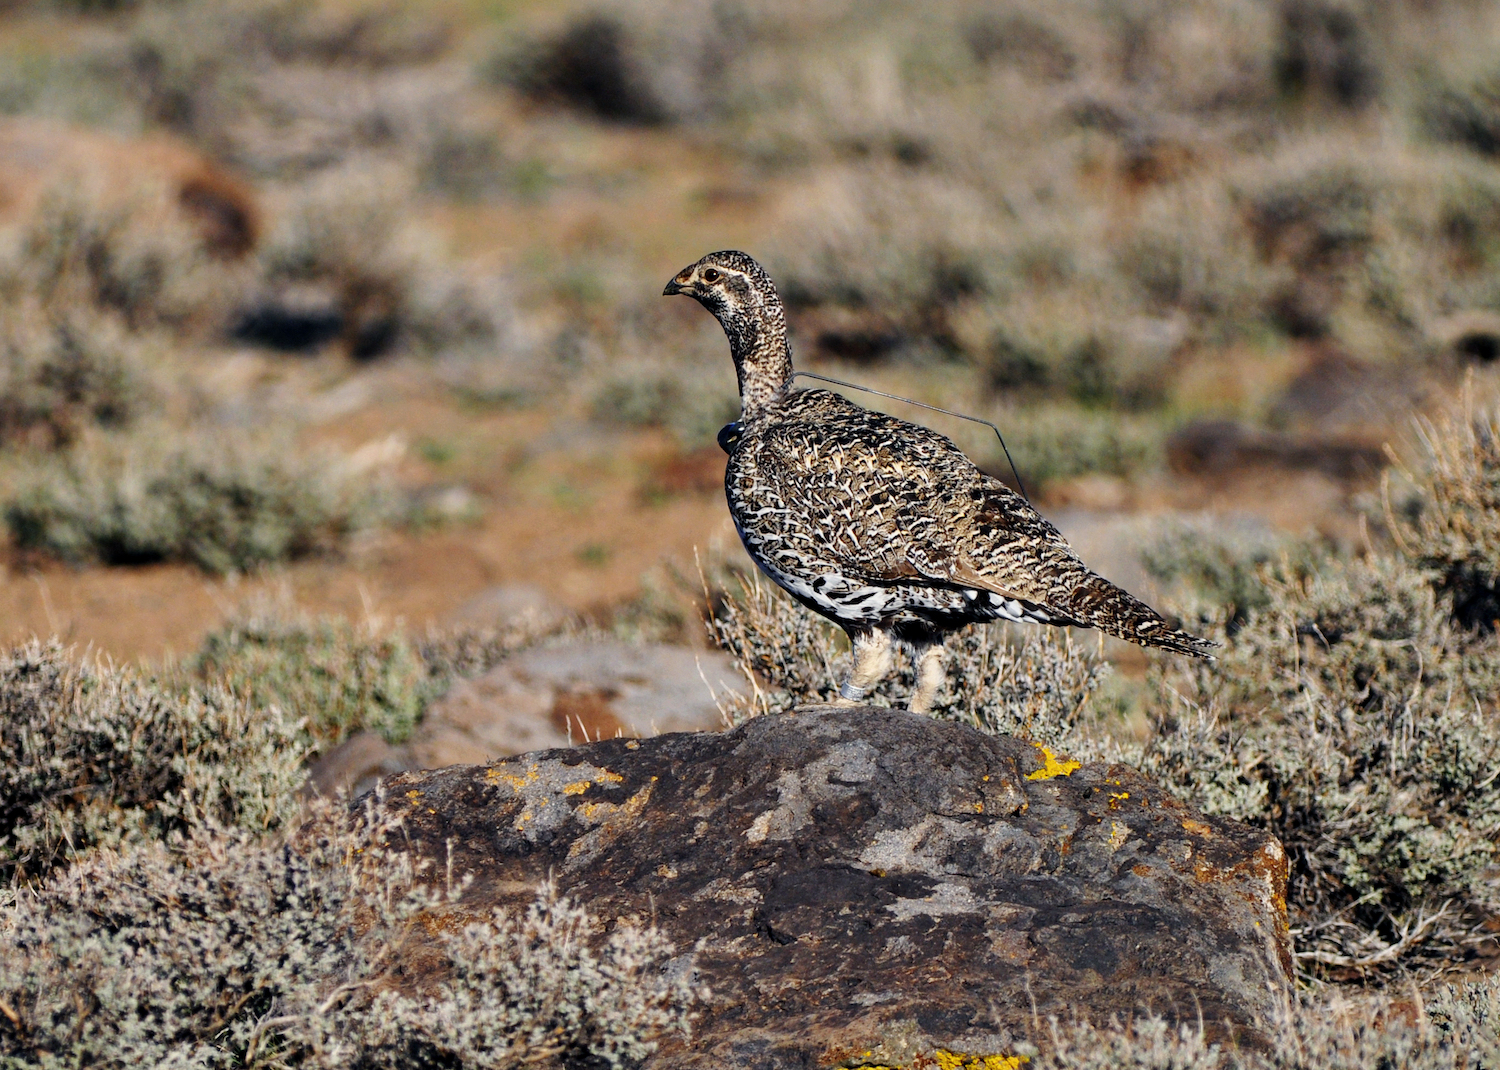 Judge: Trump administration illegally withdrew sage grouse listing